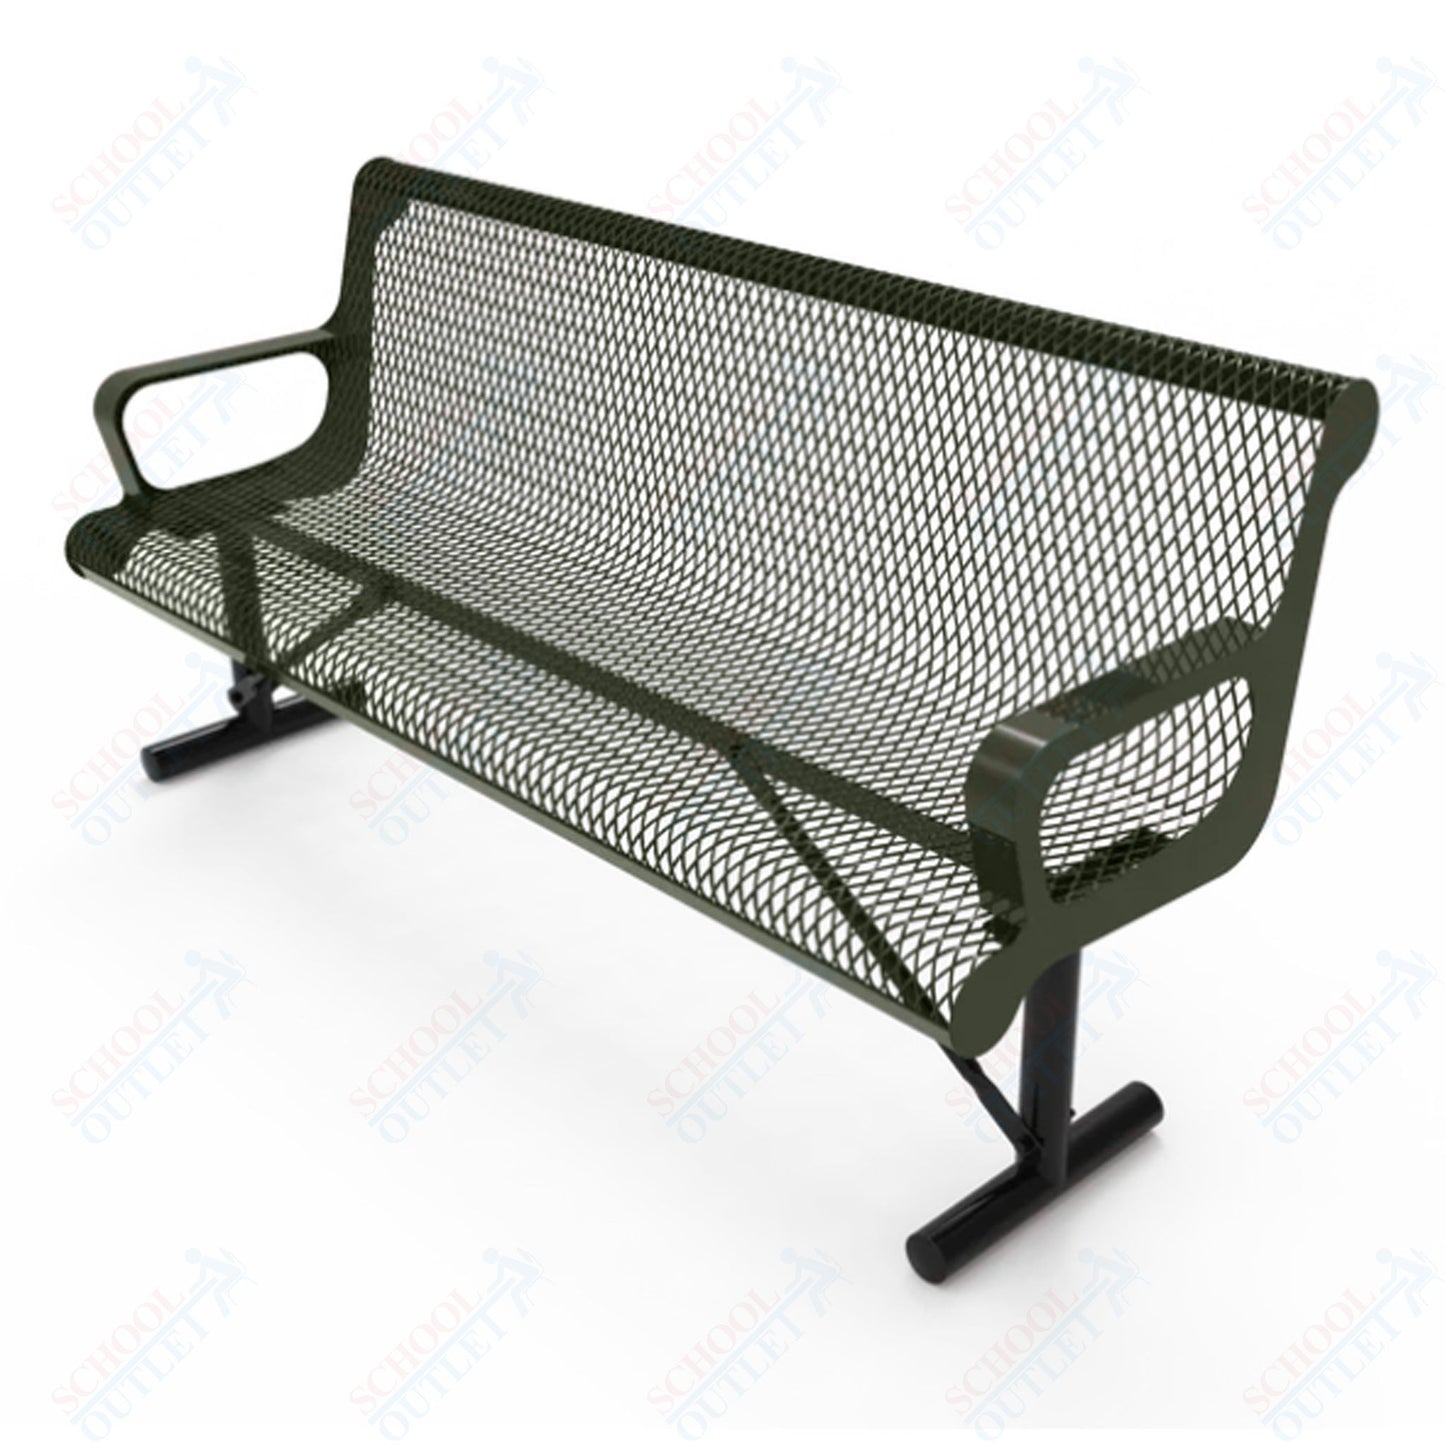 MyTcoat - Contoured Portable Outdoor Bench with Arm 6' L (MYT-BCA06-42)